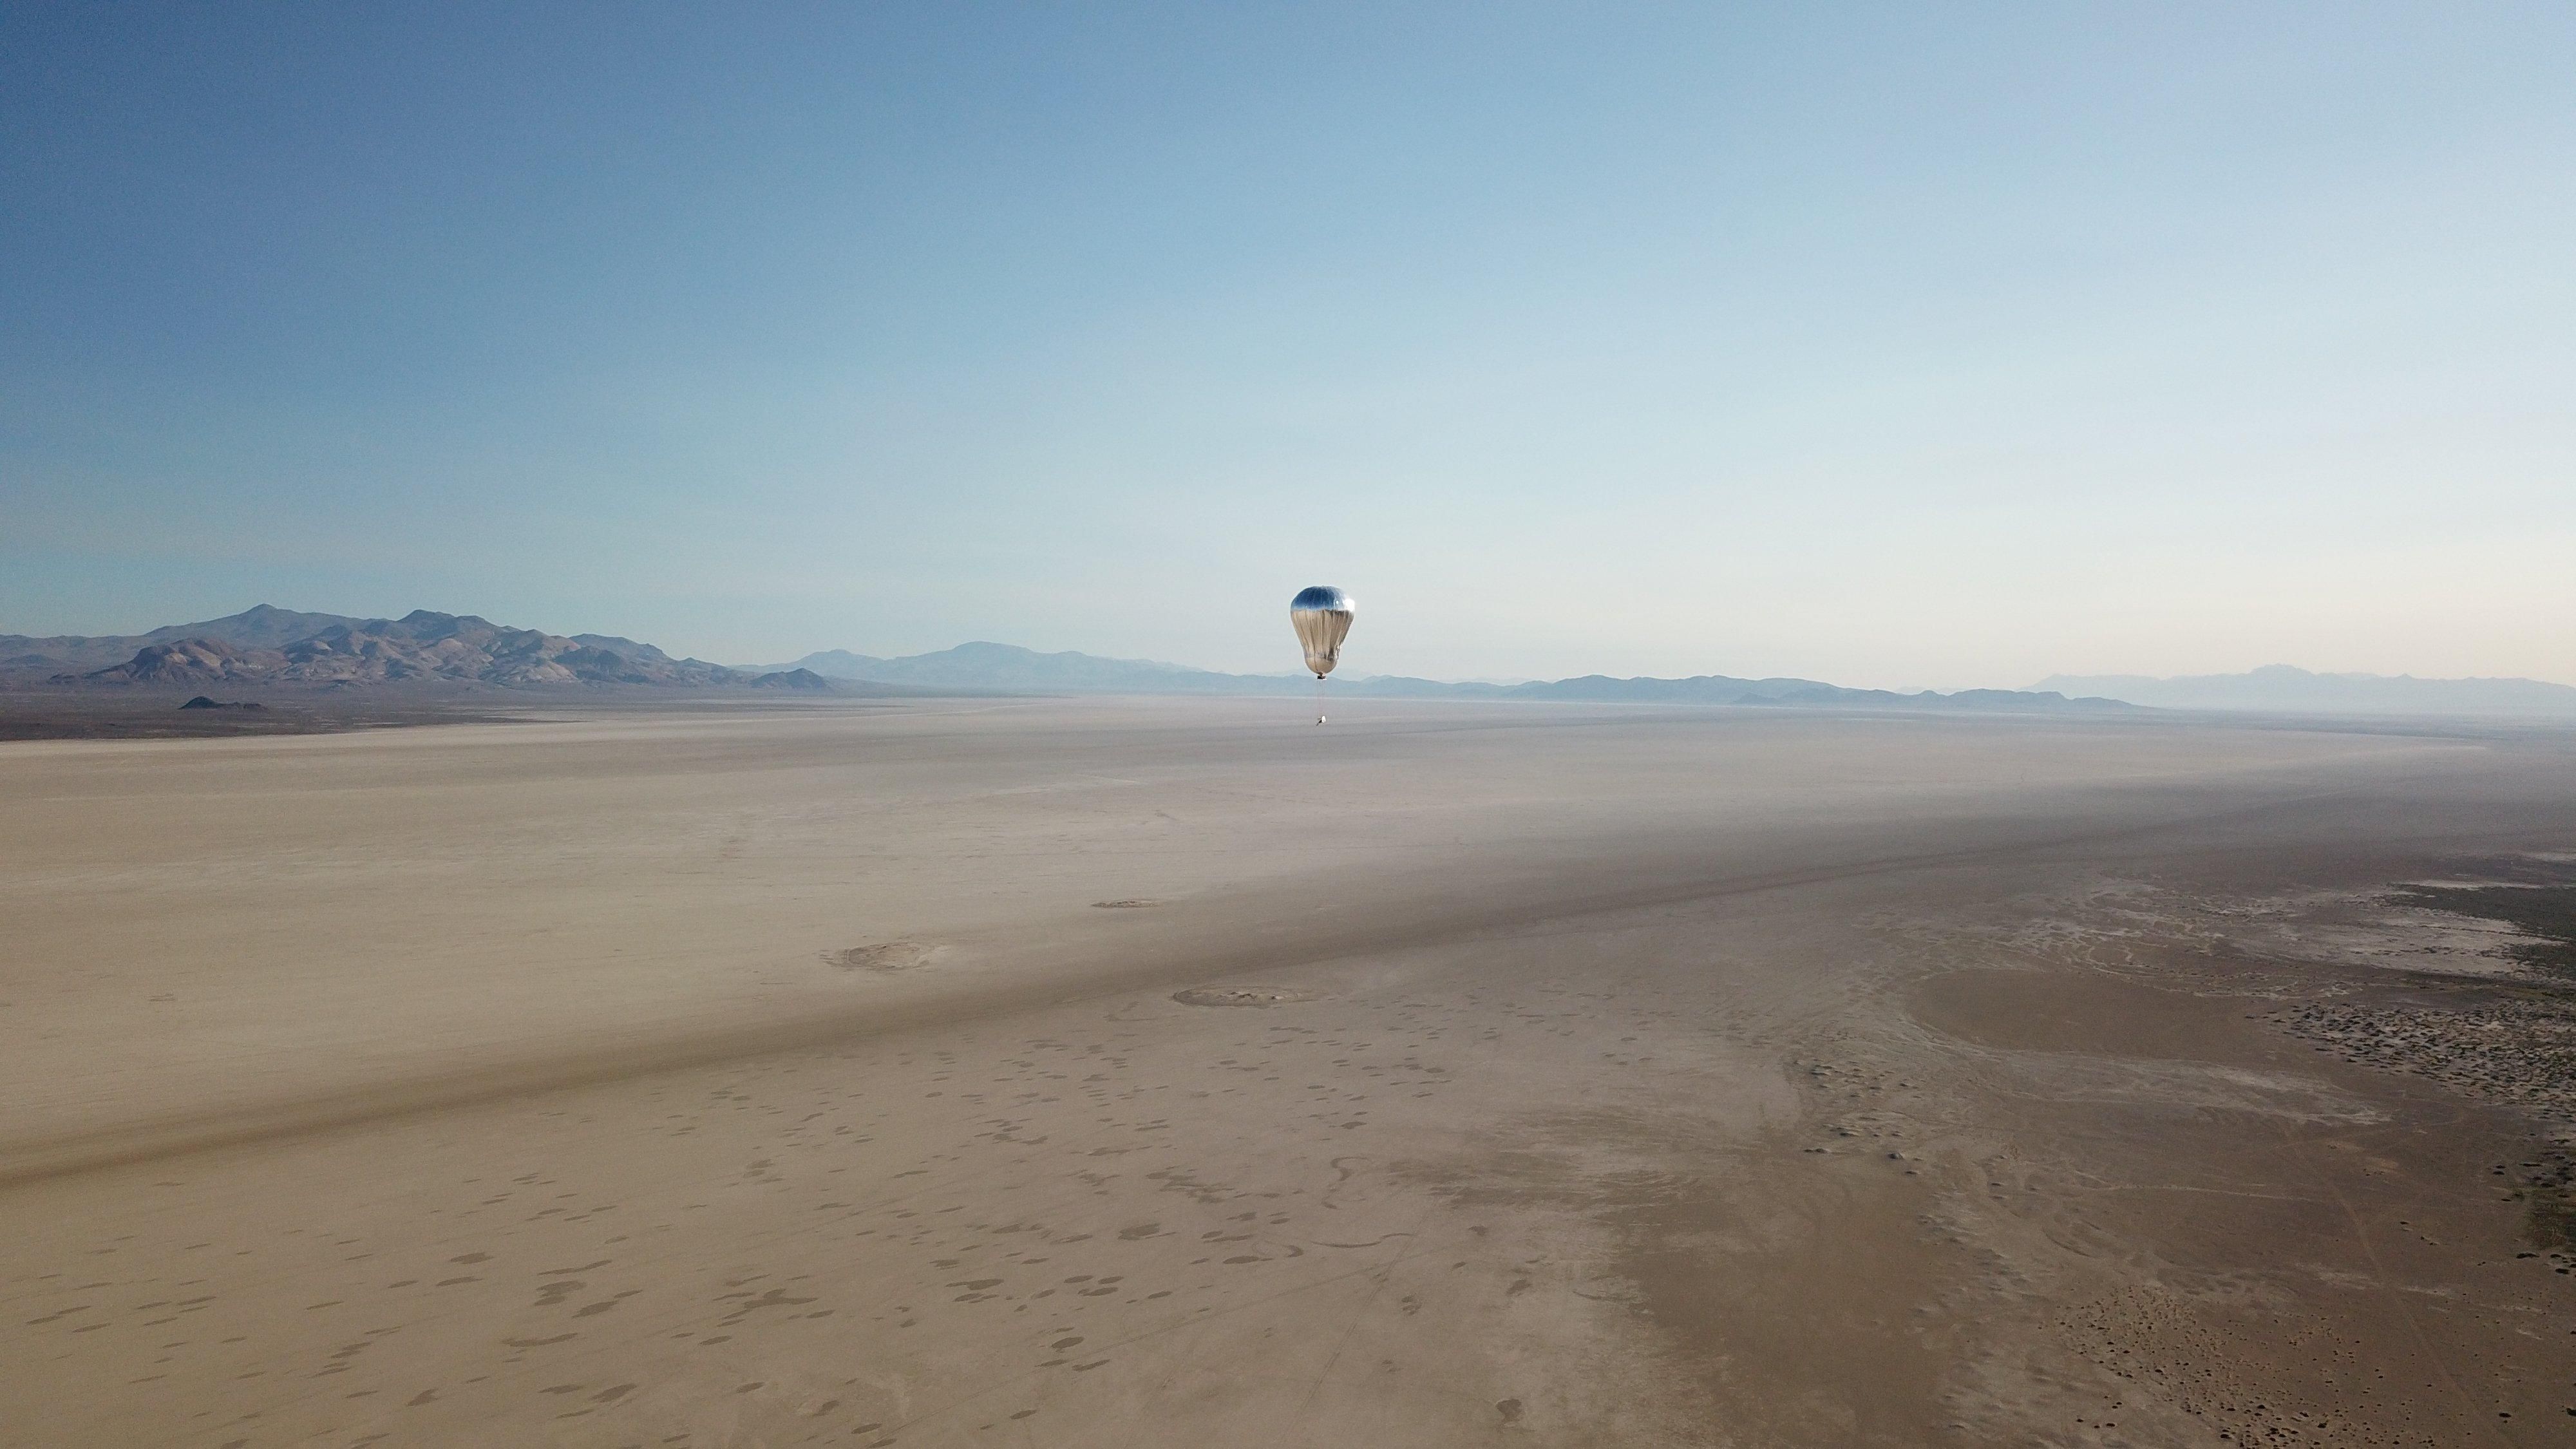 A silver balloon with a robotic payload drifts high above a desert landscape